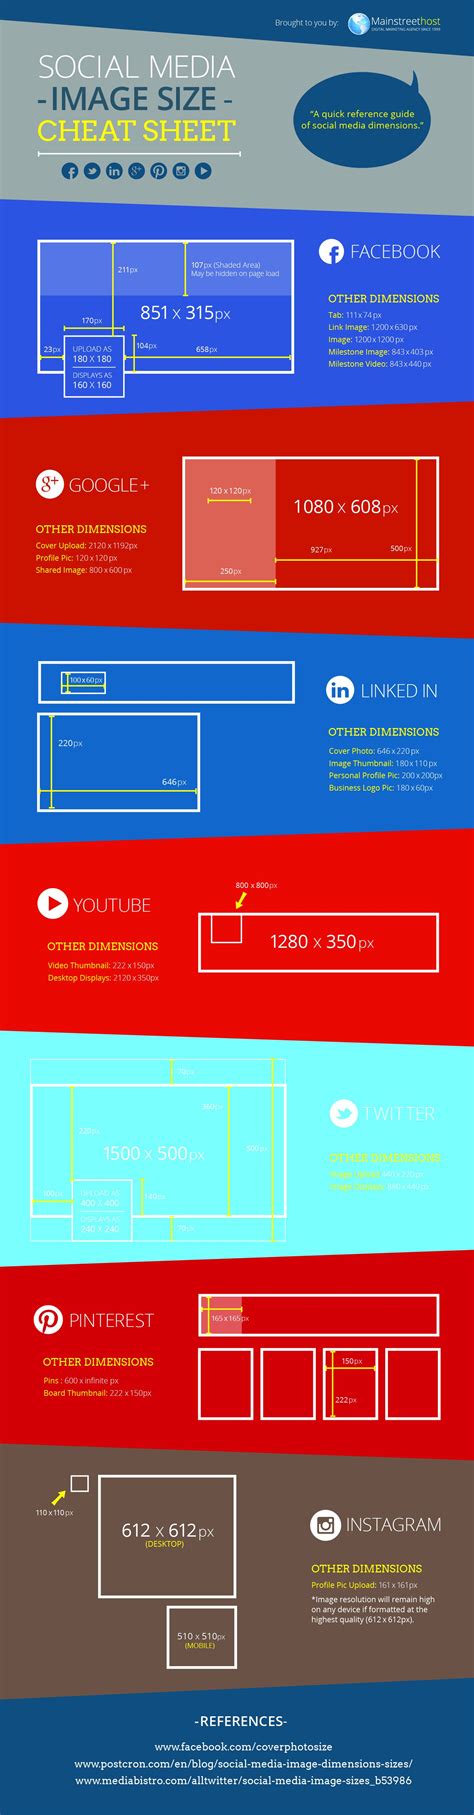 Your Definitive Guide To Social Media Image Sizes